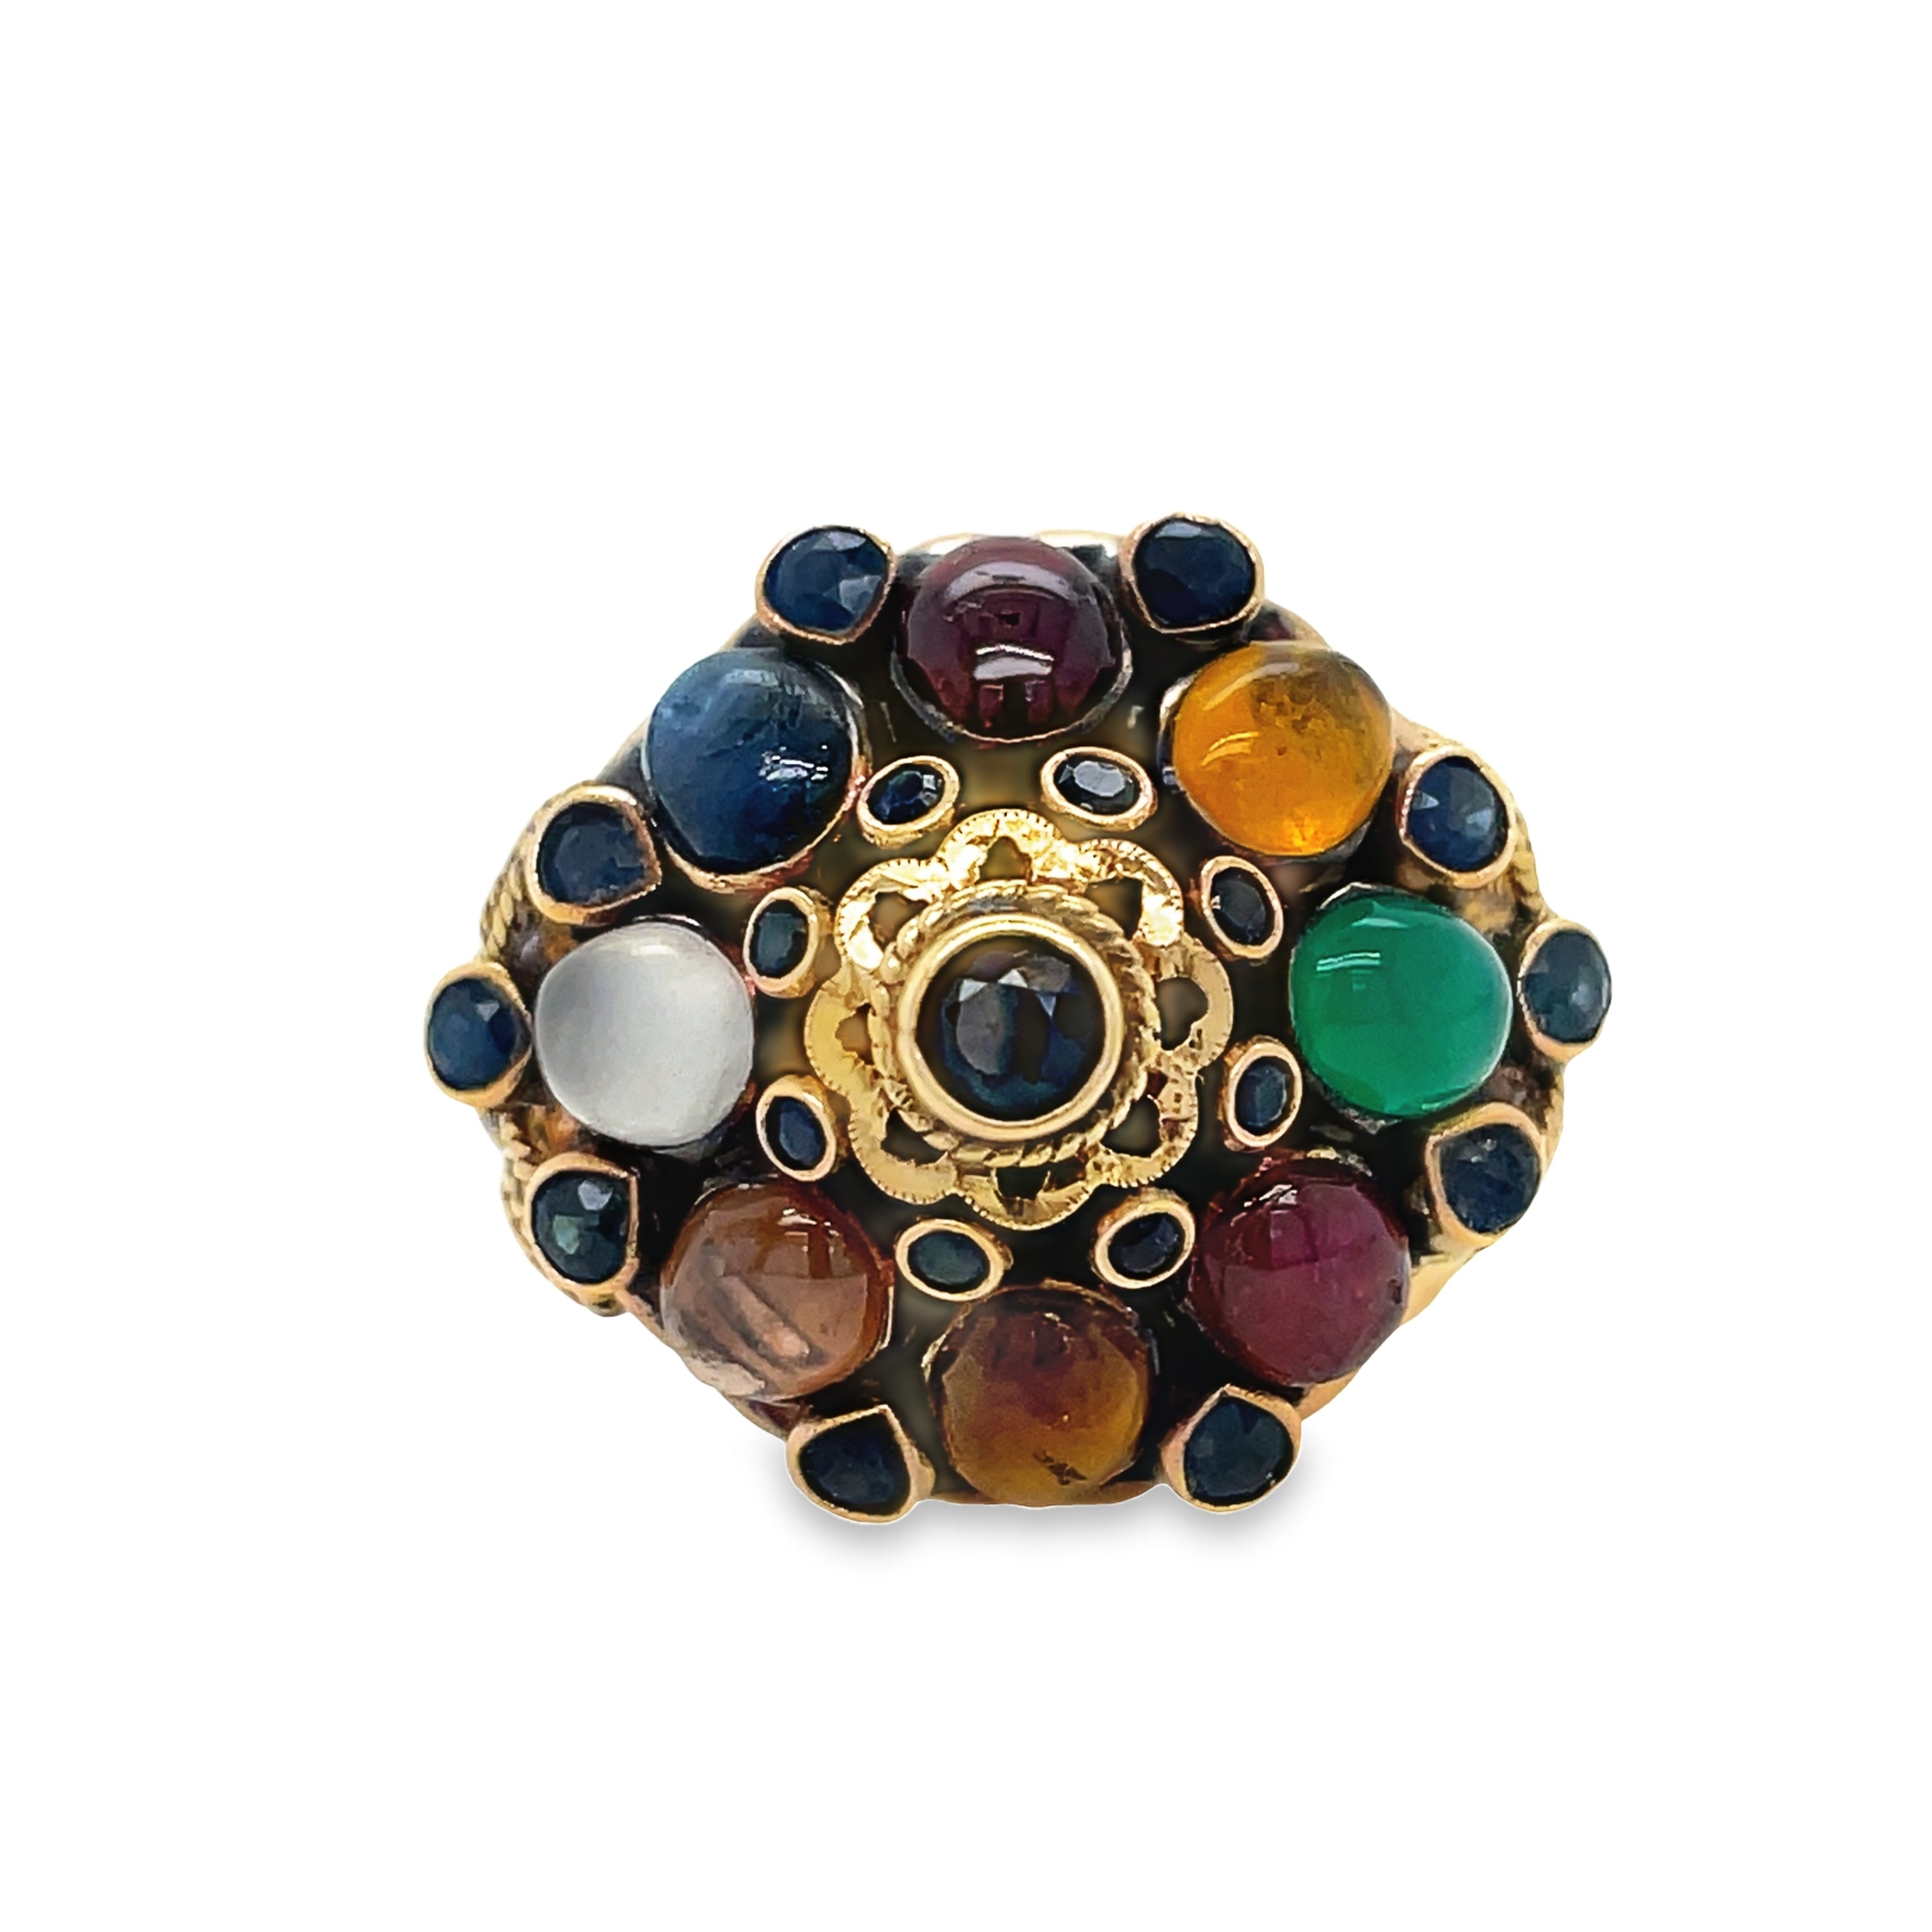 Discover a stunning blend of vintage style and luxury with our Color Stone Cluster Ring. Crafted with a mix of cabochon sapphires, emeralds and rubies, set in 14k yellow gold, this ring offers a one-of-a-kind look. Available in size 6.5.